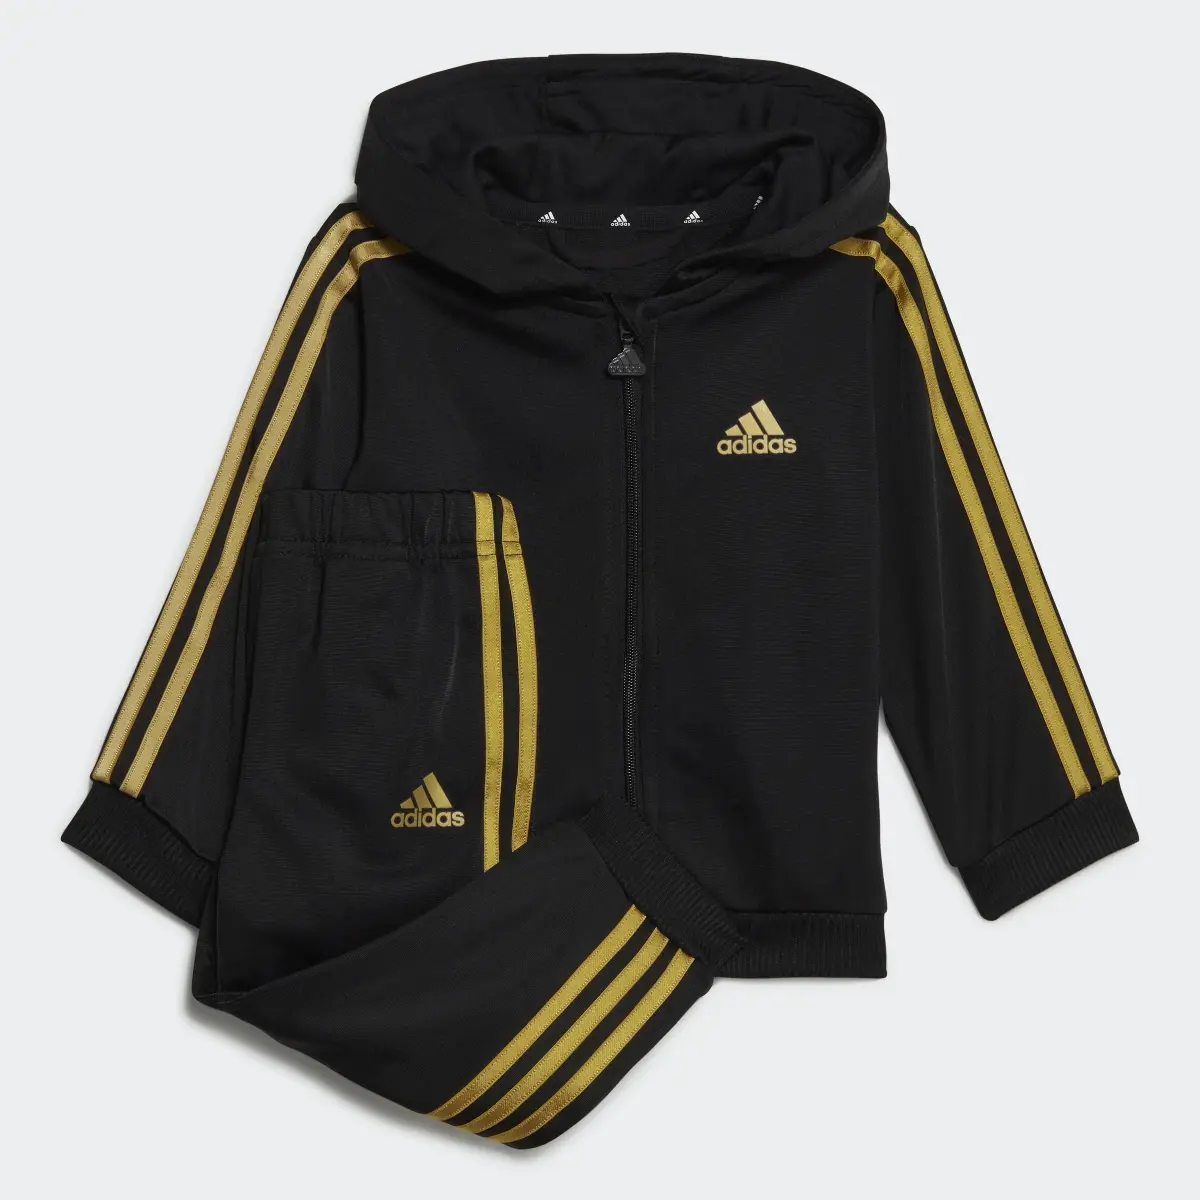 Adidas Essentials Shiny Hooded Track Suit. 1